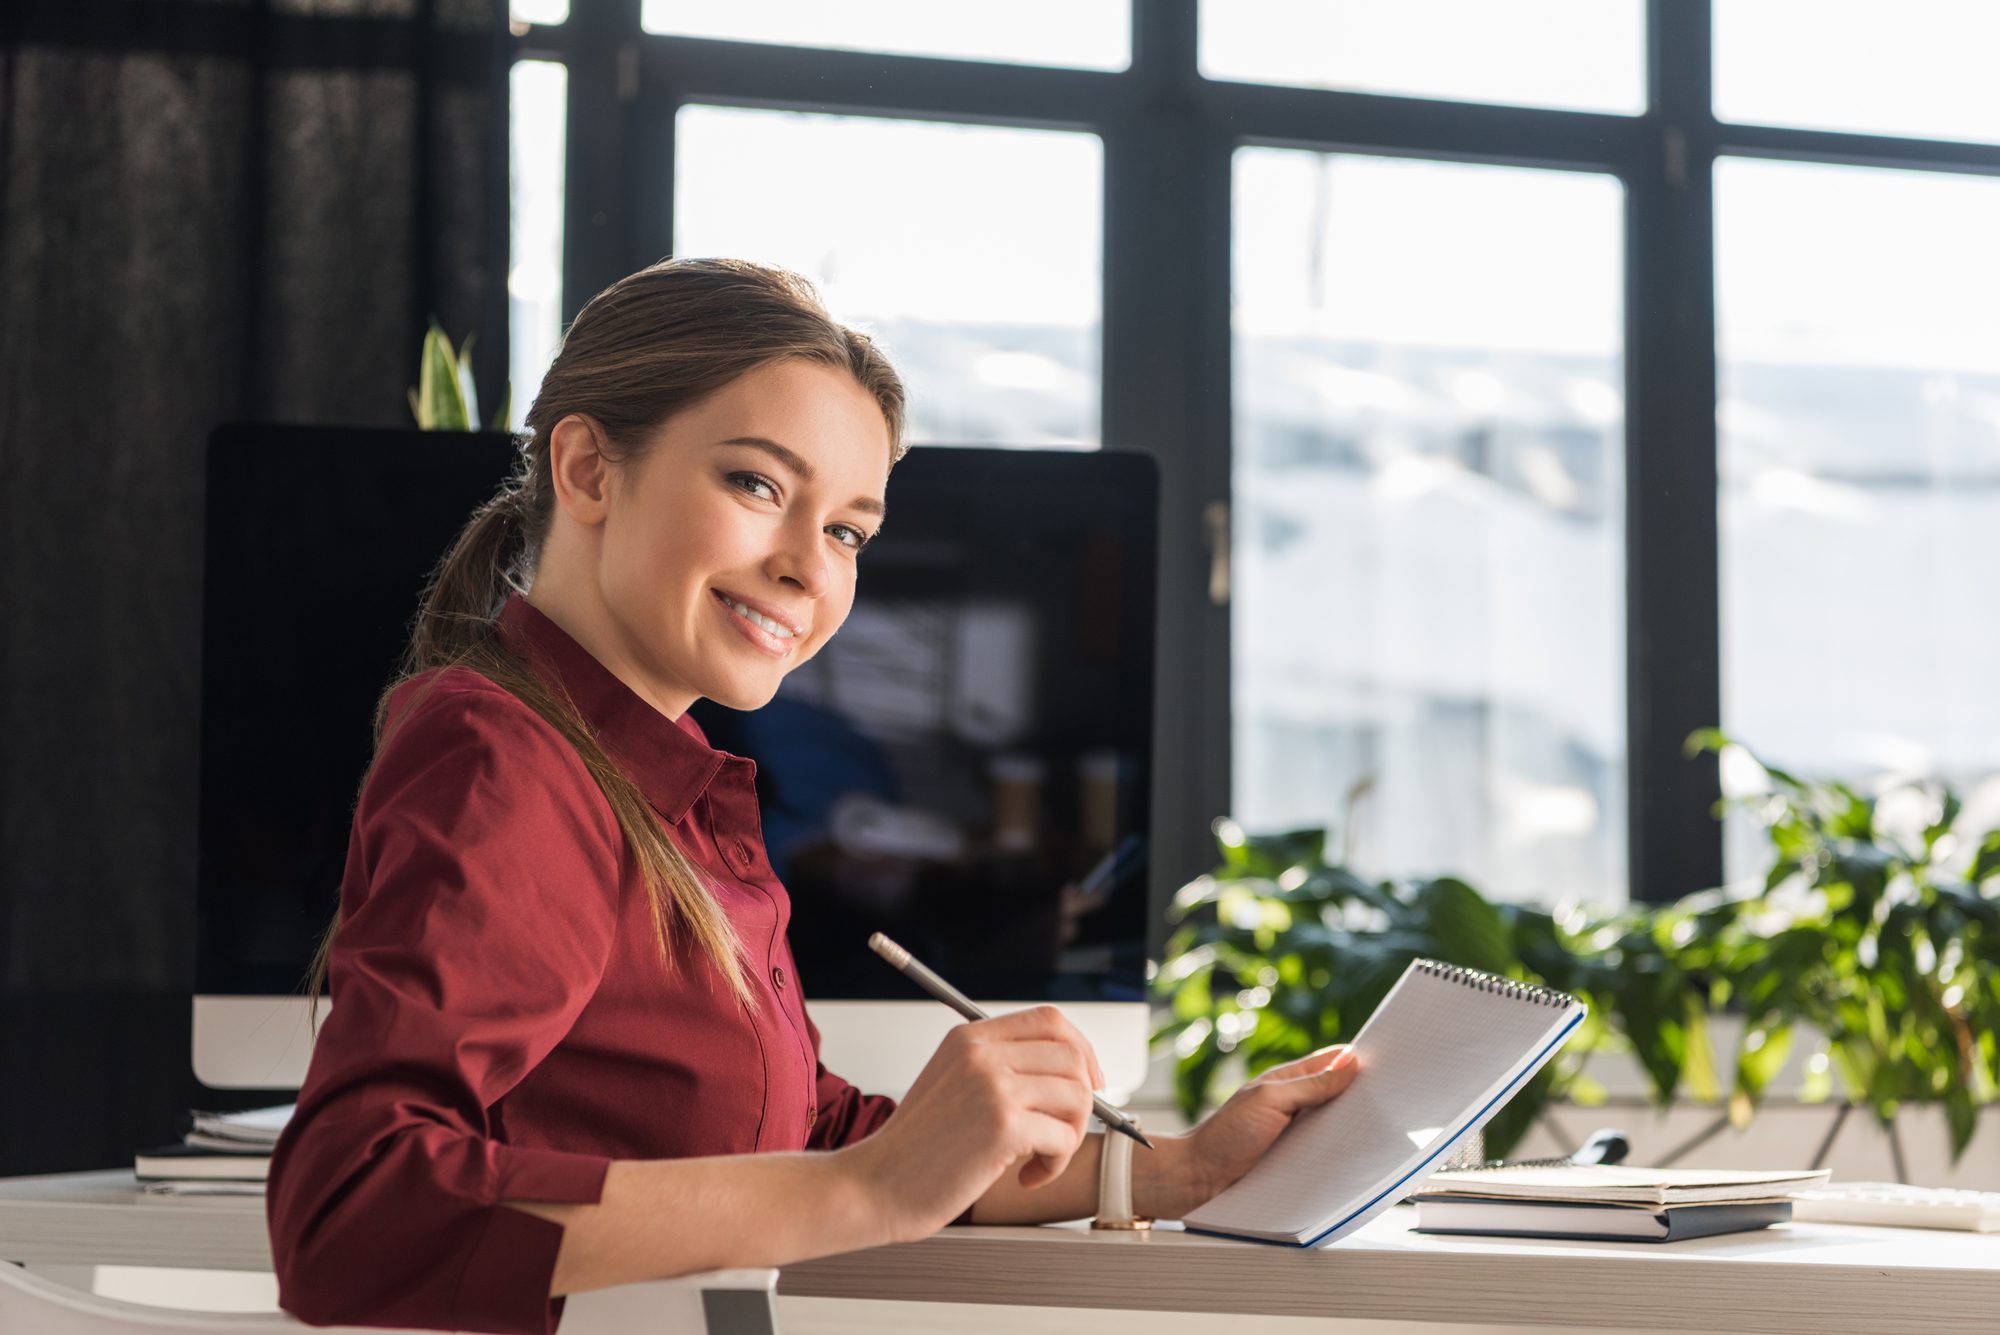 Portrait of female office working smiling while writing